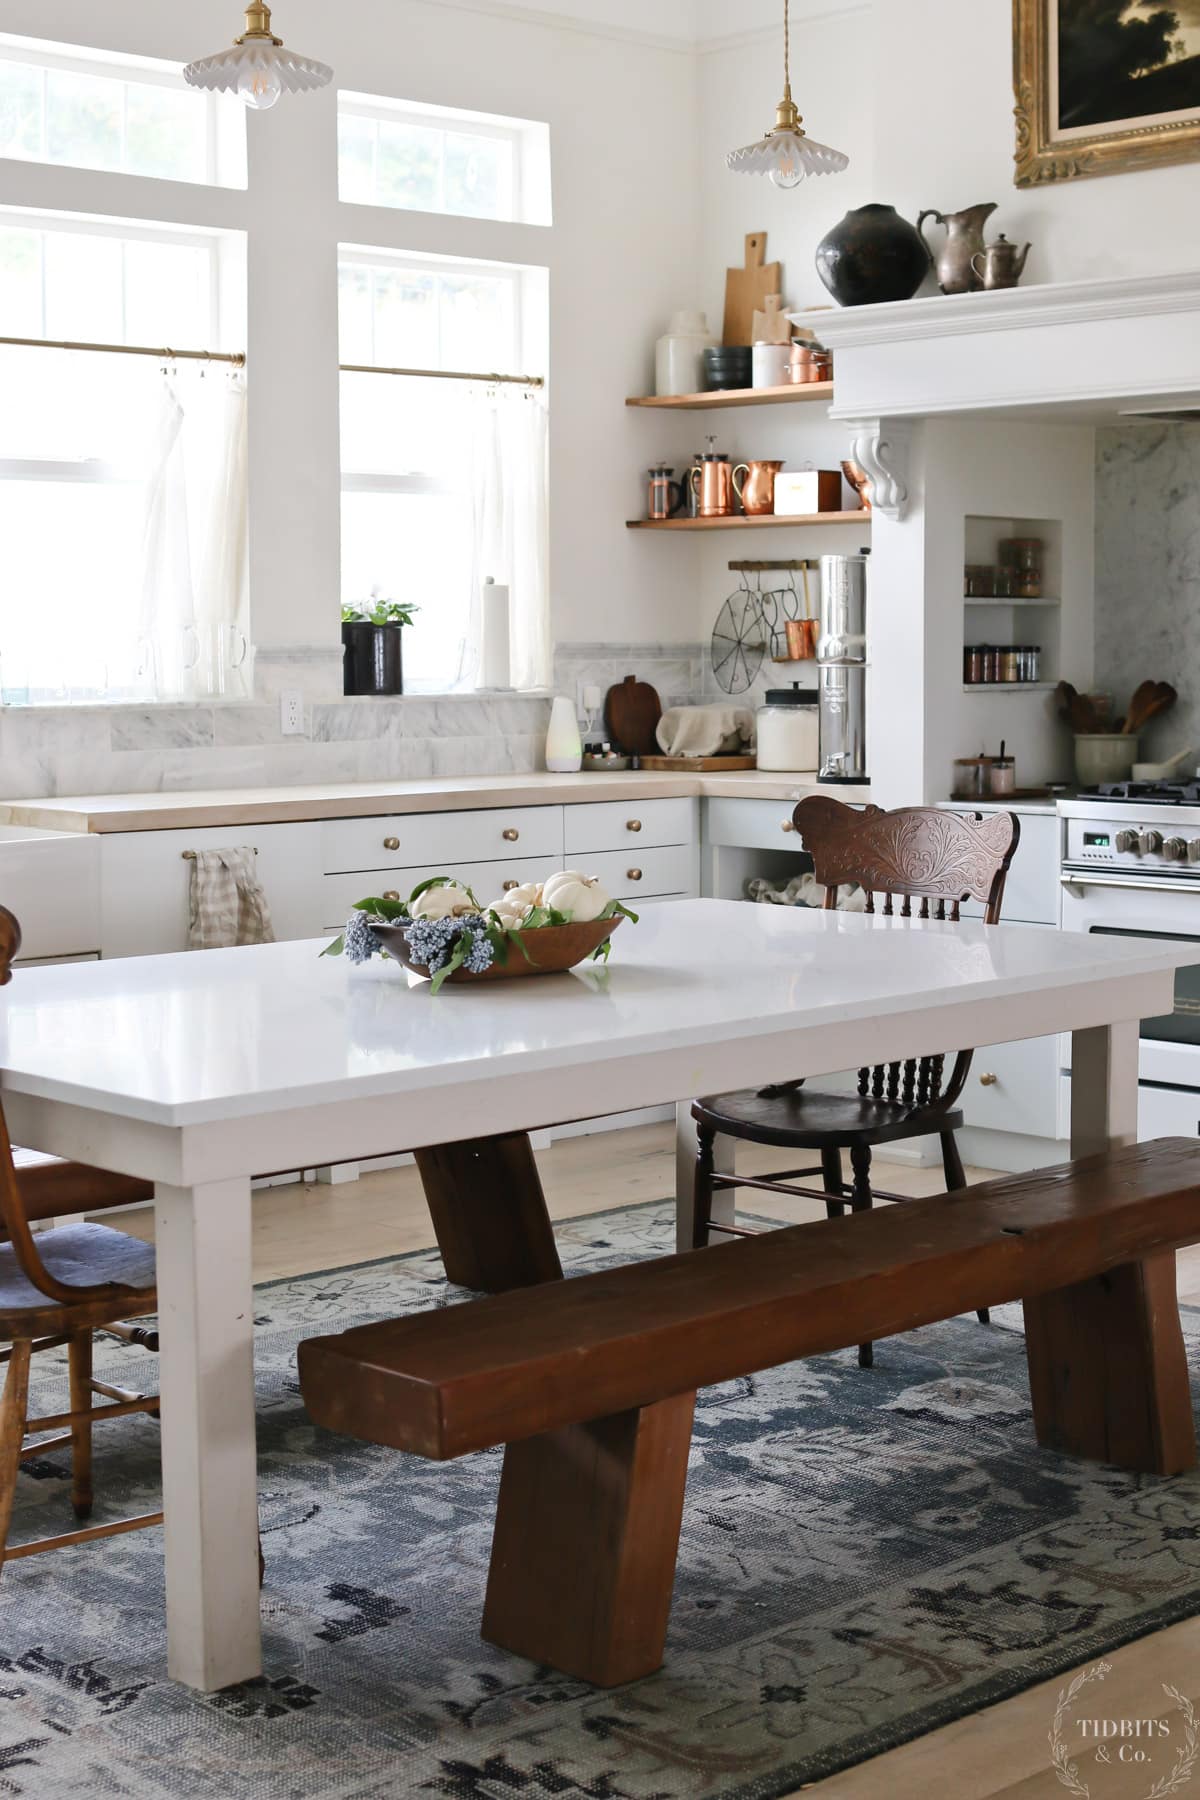 A country kitchen with cabinets, benches and a table with a fall floral arrangement